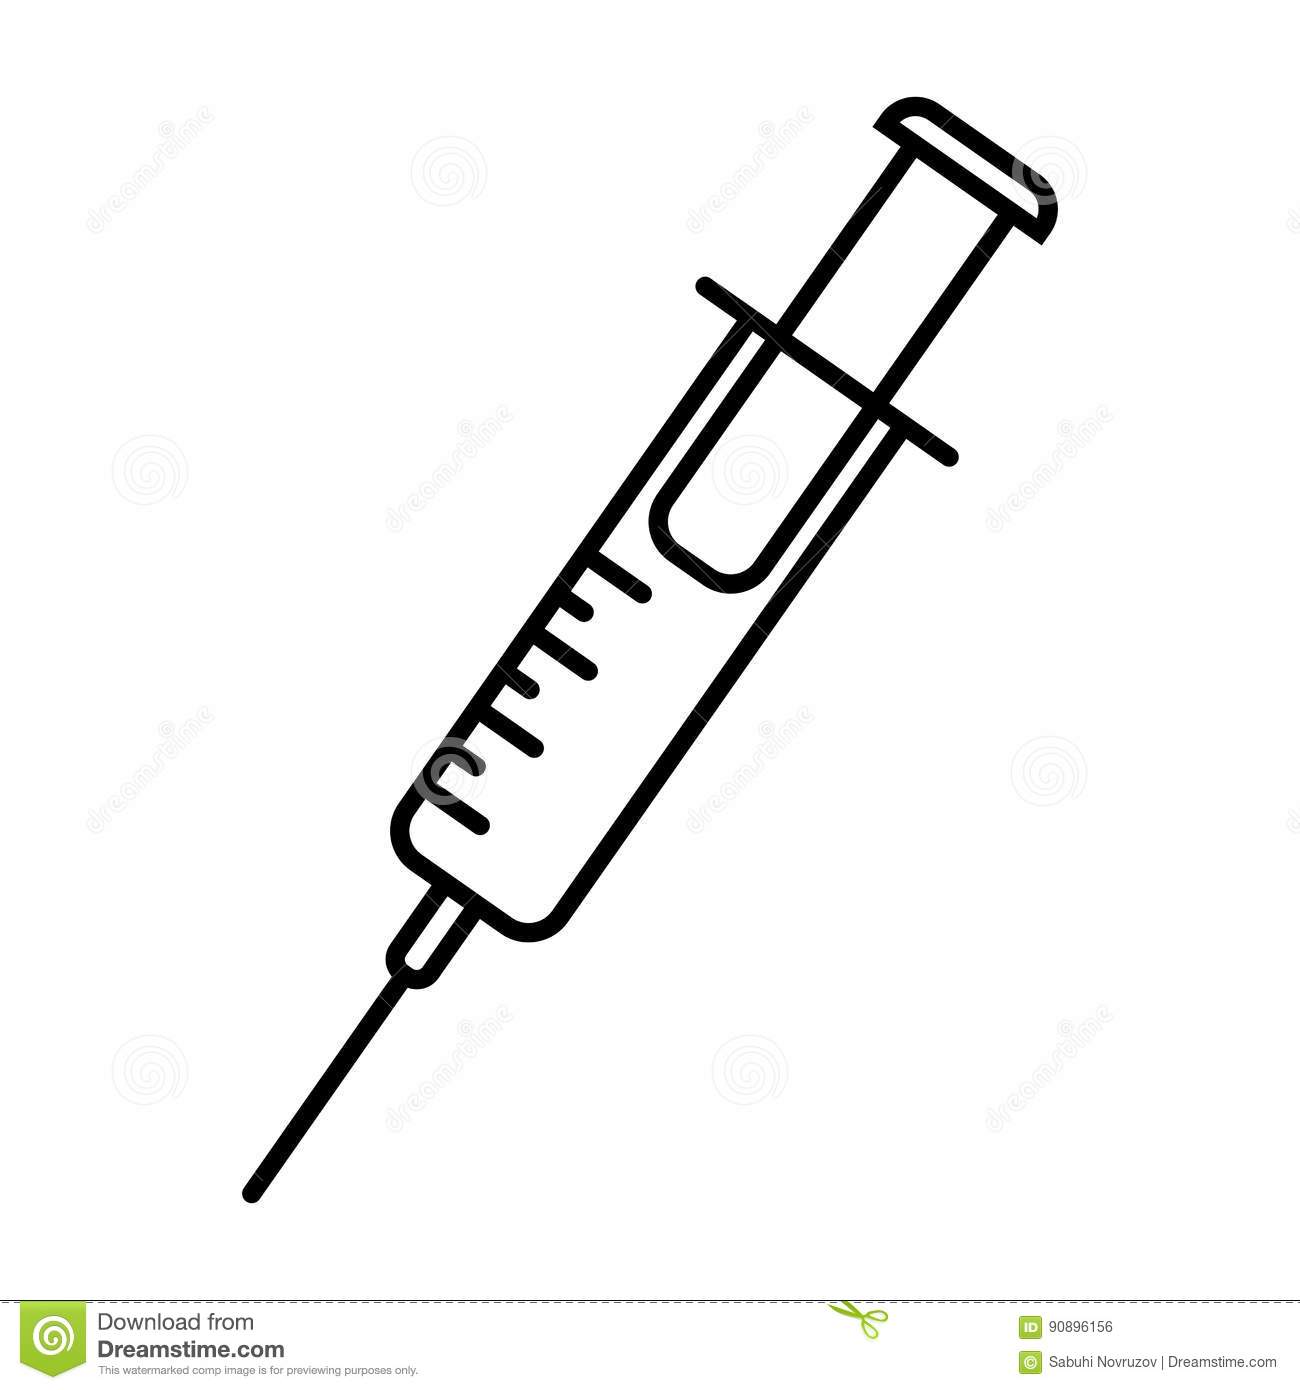 Injection clipart black.